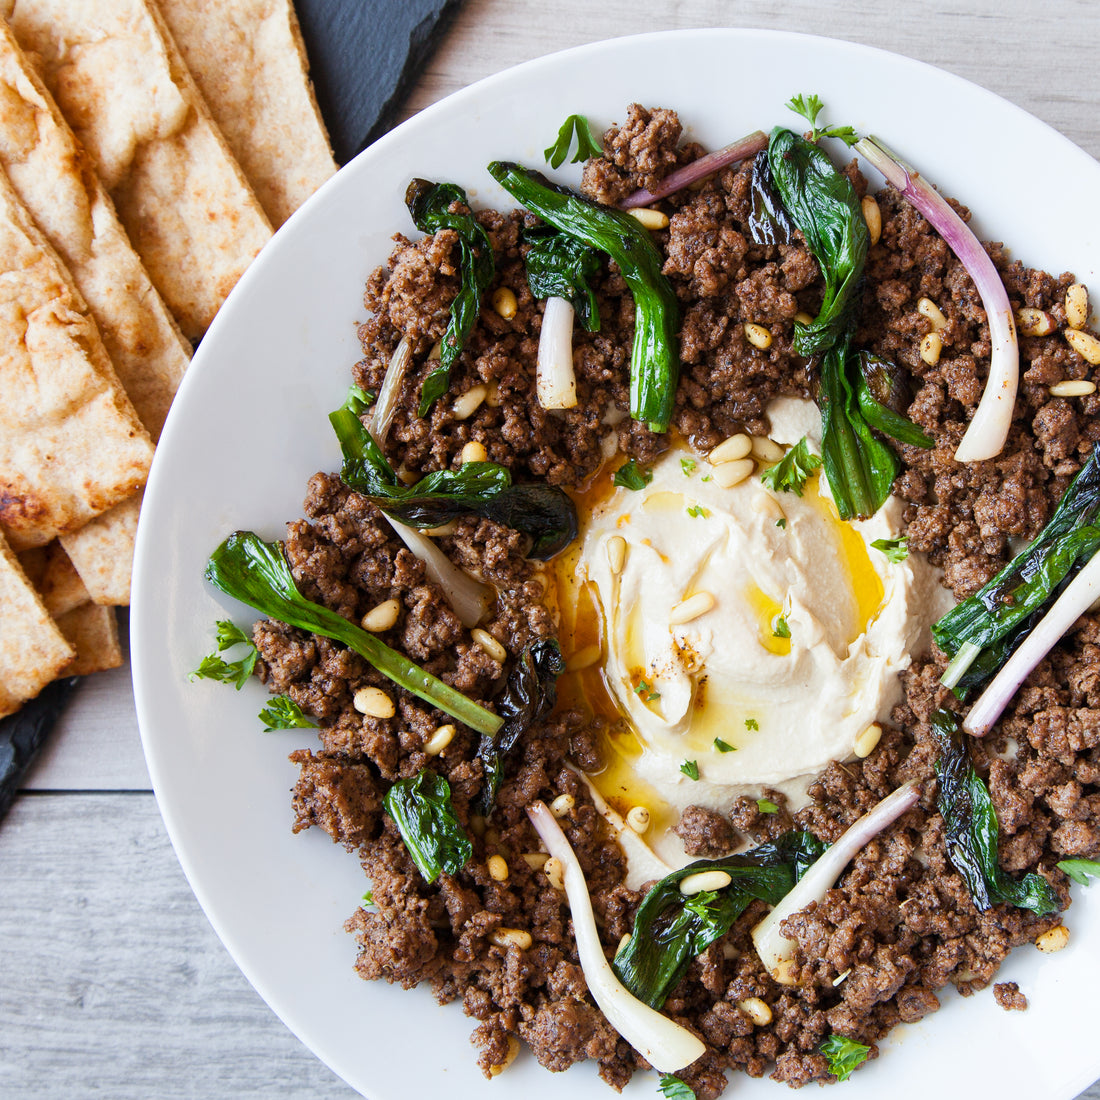 Top 5 Spring Ground Beef Recipes